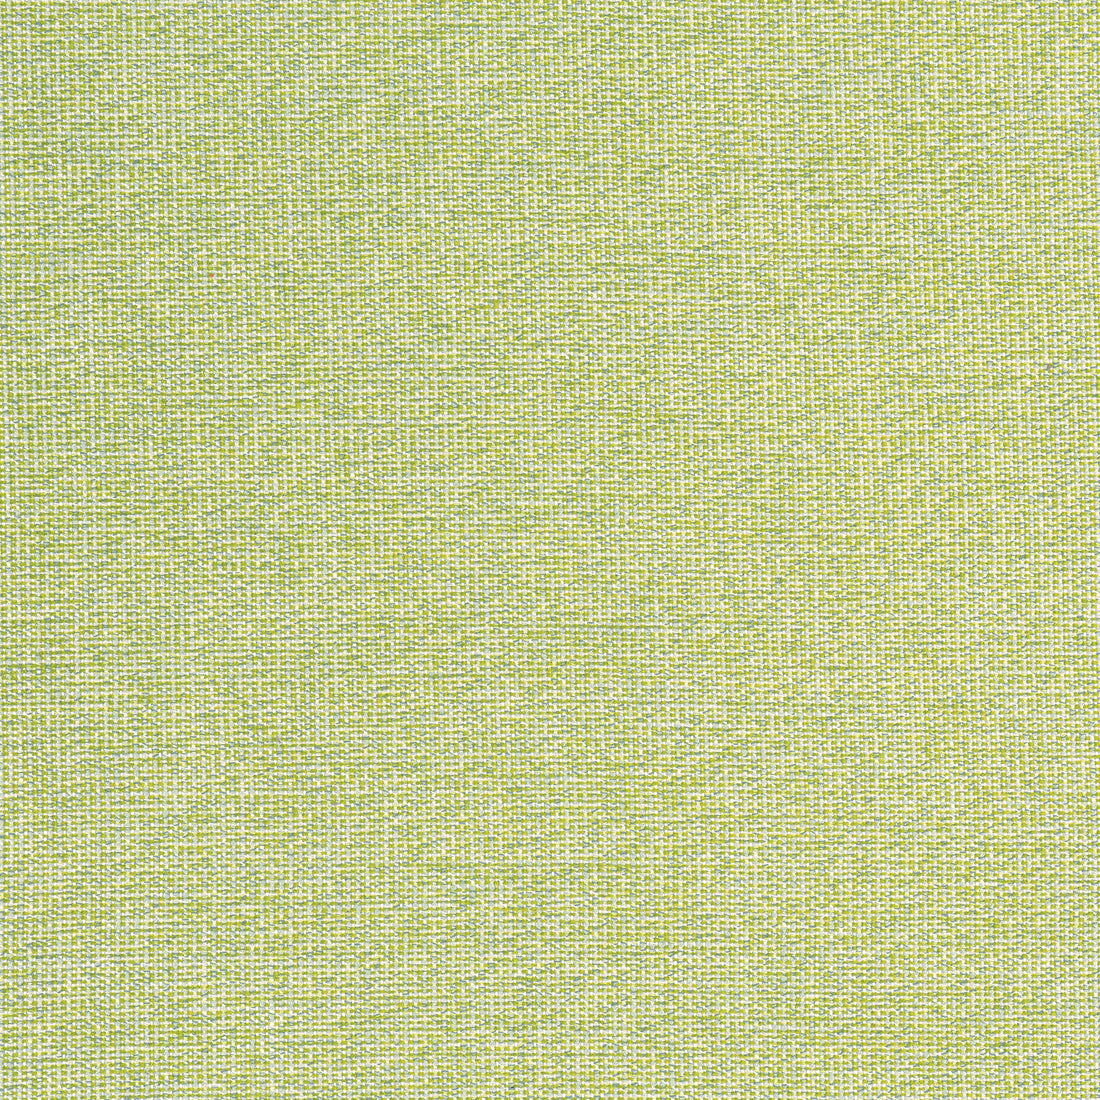 Sacchi fabric in leaf color - pattern number W8763 - by Thibaut in the Haven Textures collection